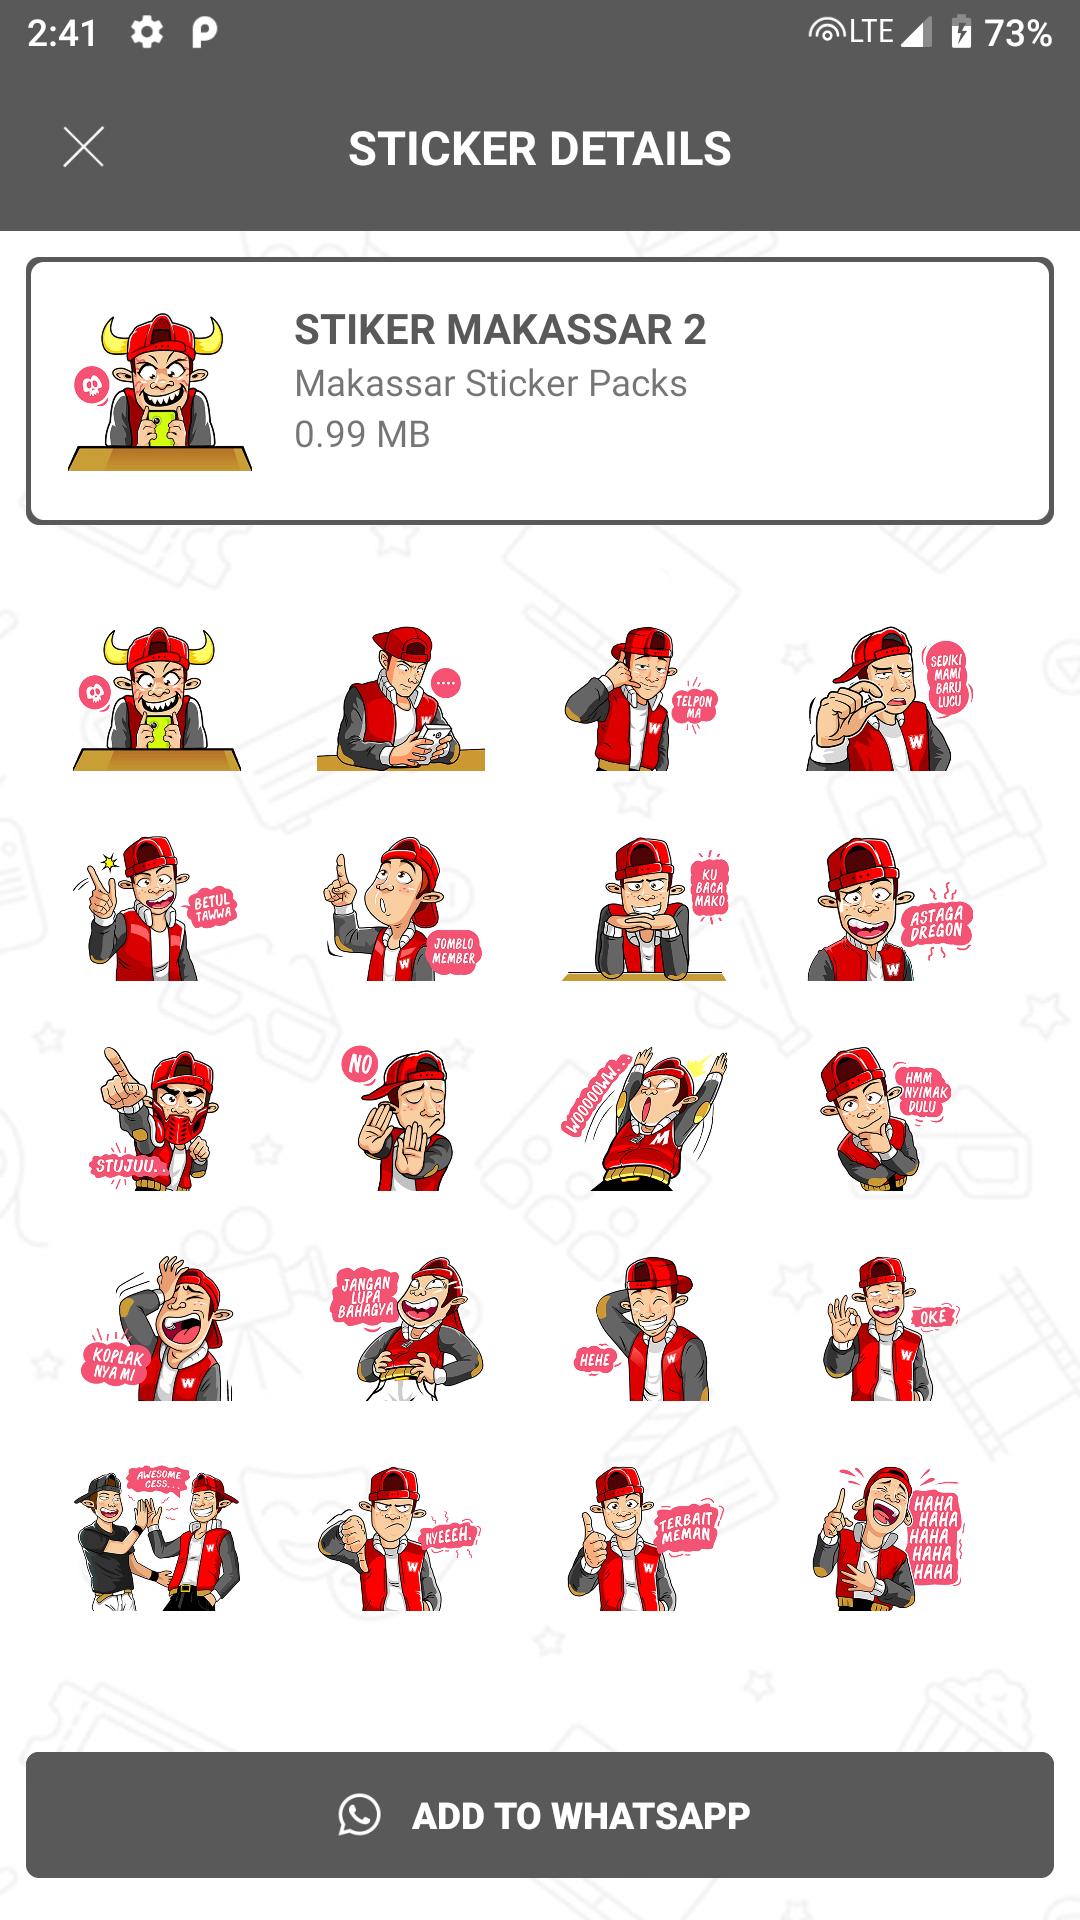 Stiker Makassar For Android Apk Download